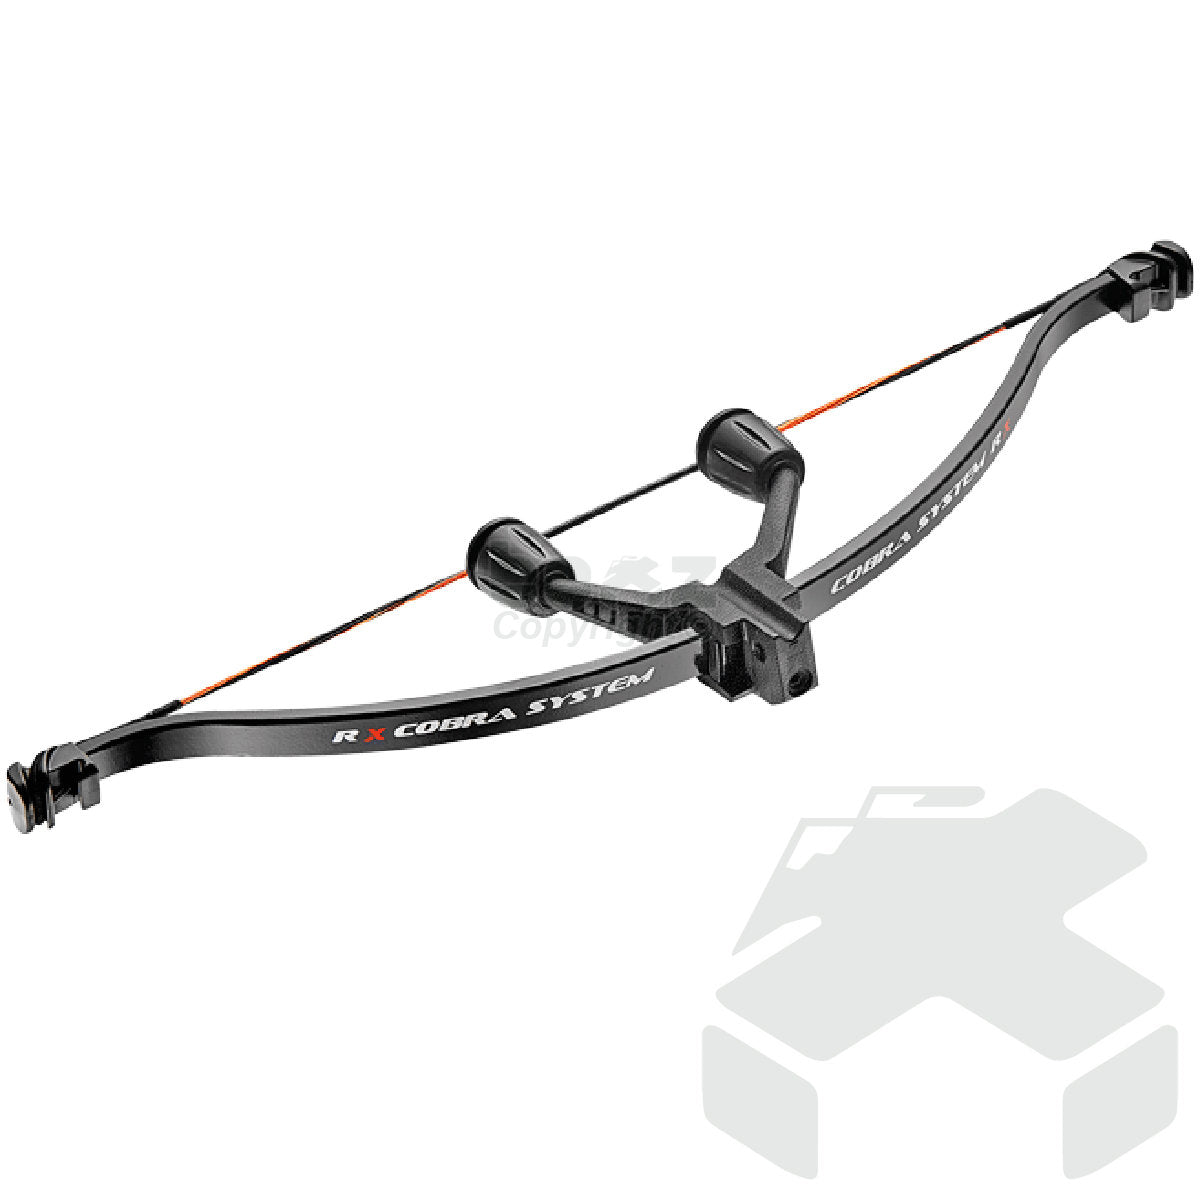 EK Archery RX Cobra / Adder Crossbow Front End (Prod) Unit with String Stoppers - 130lbs